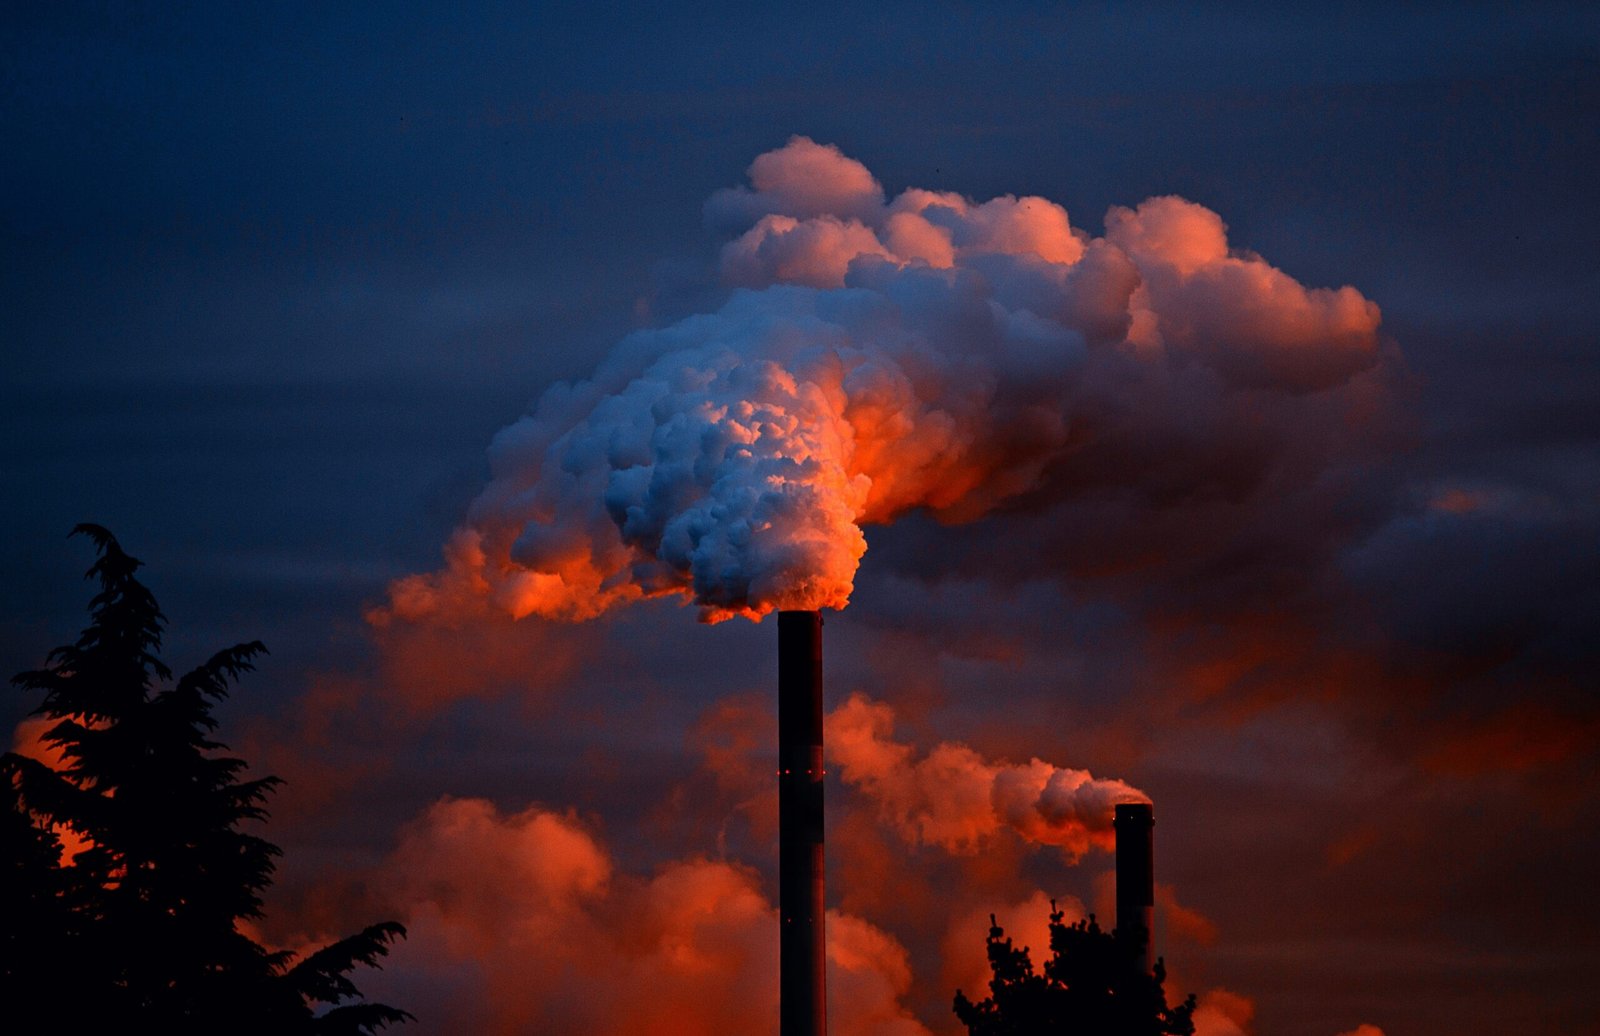 A photograph of air pollution by a factory.